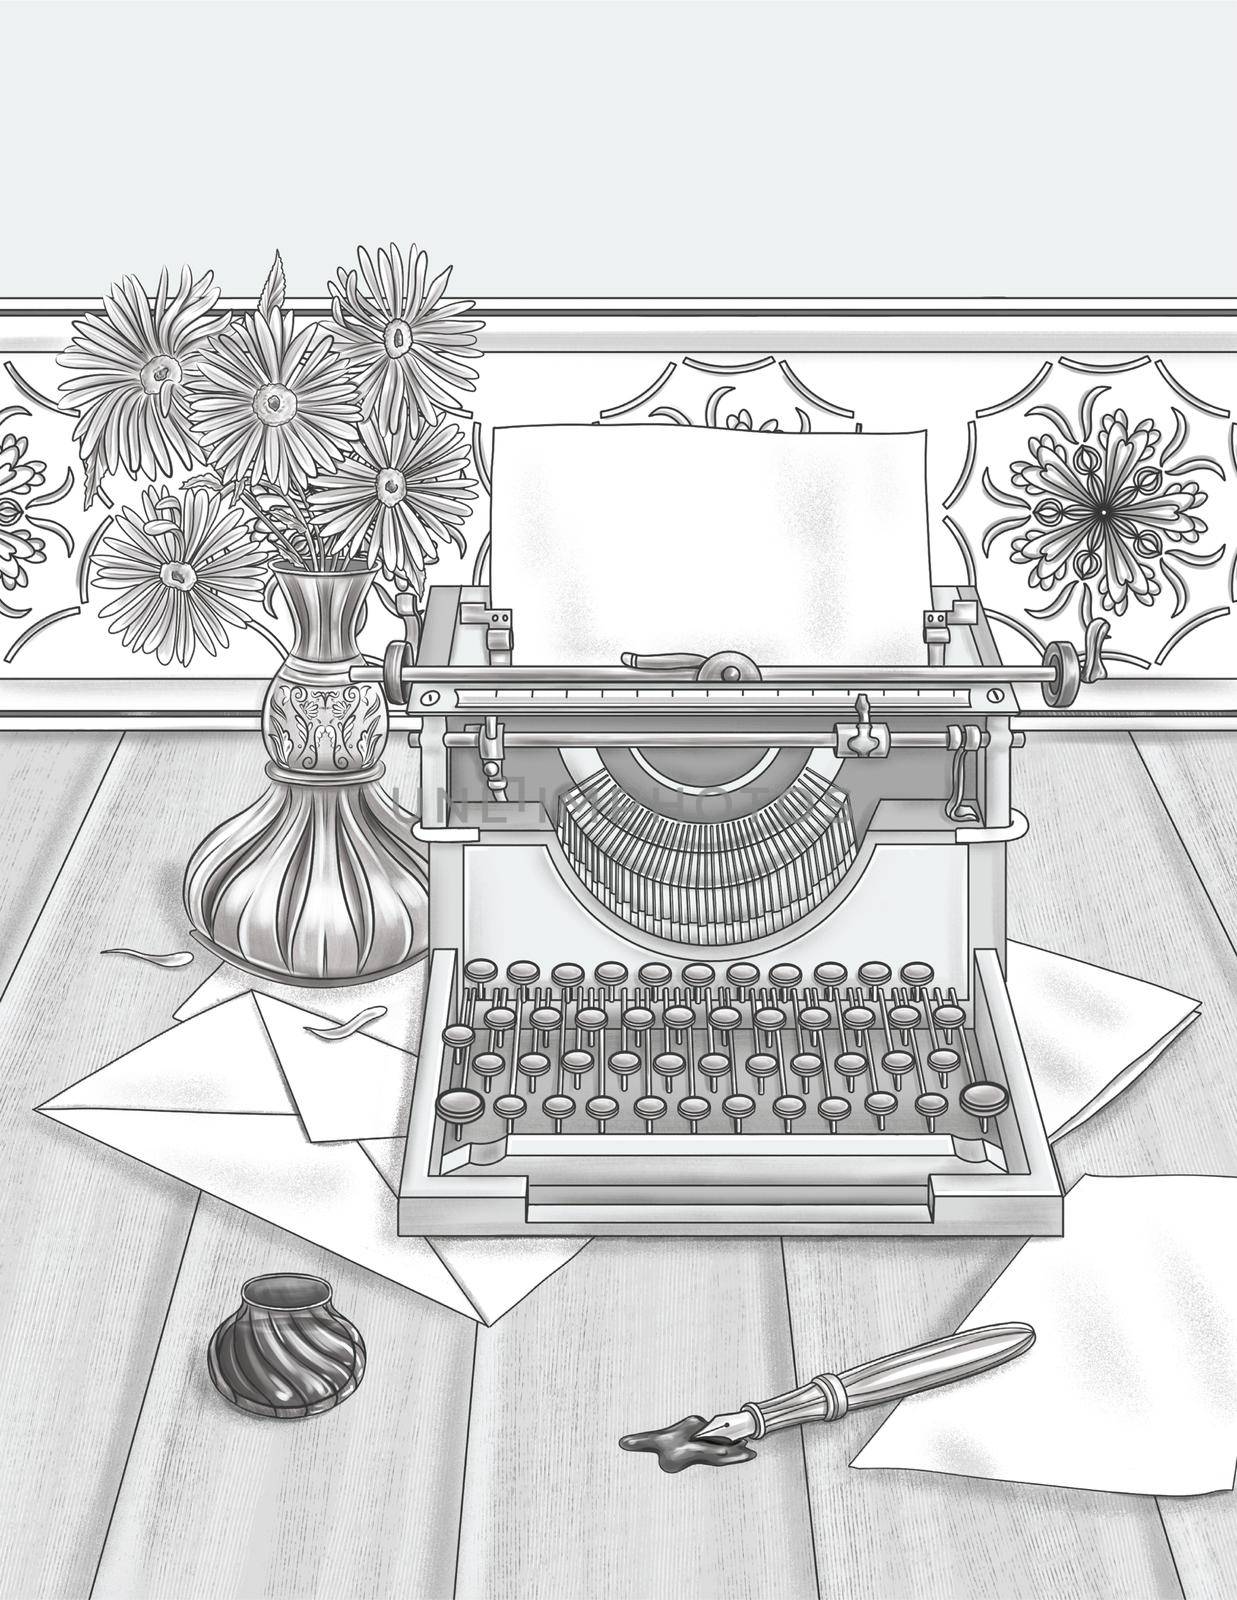 Vintage Typing Machine Placed On Table Top With Vase Paper Envelop Ink Bottle Colorless Line Drawing. Old Typewriter On A Desk With Notes Fountain Pen Coloring Book Page. by nialowwa